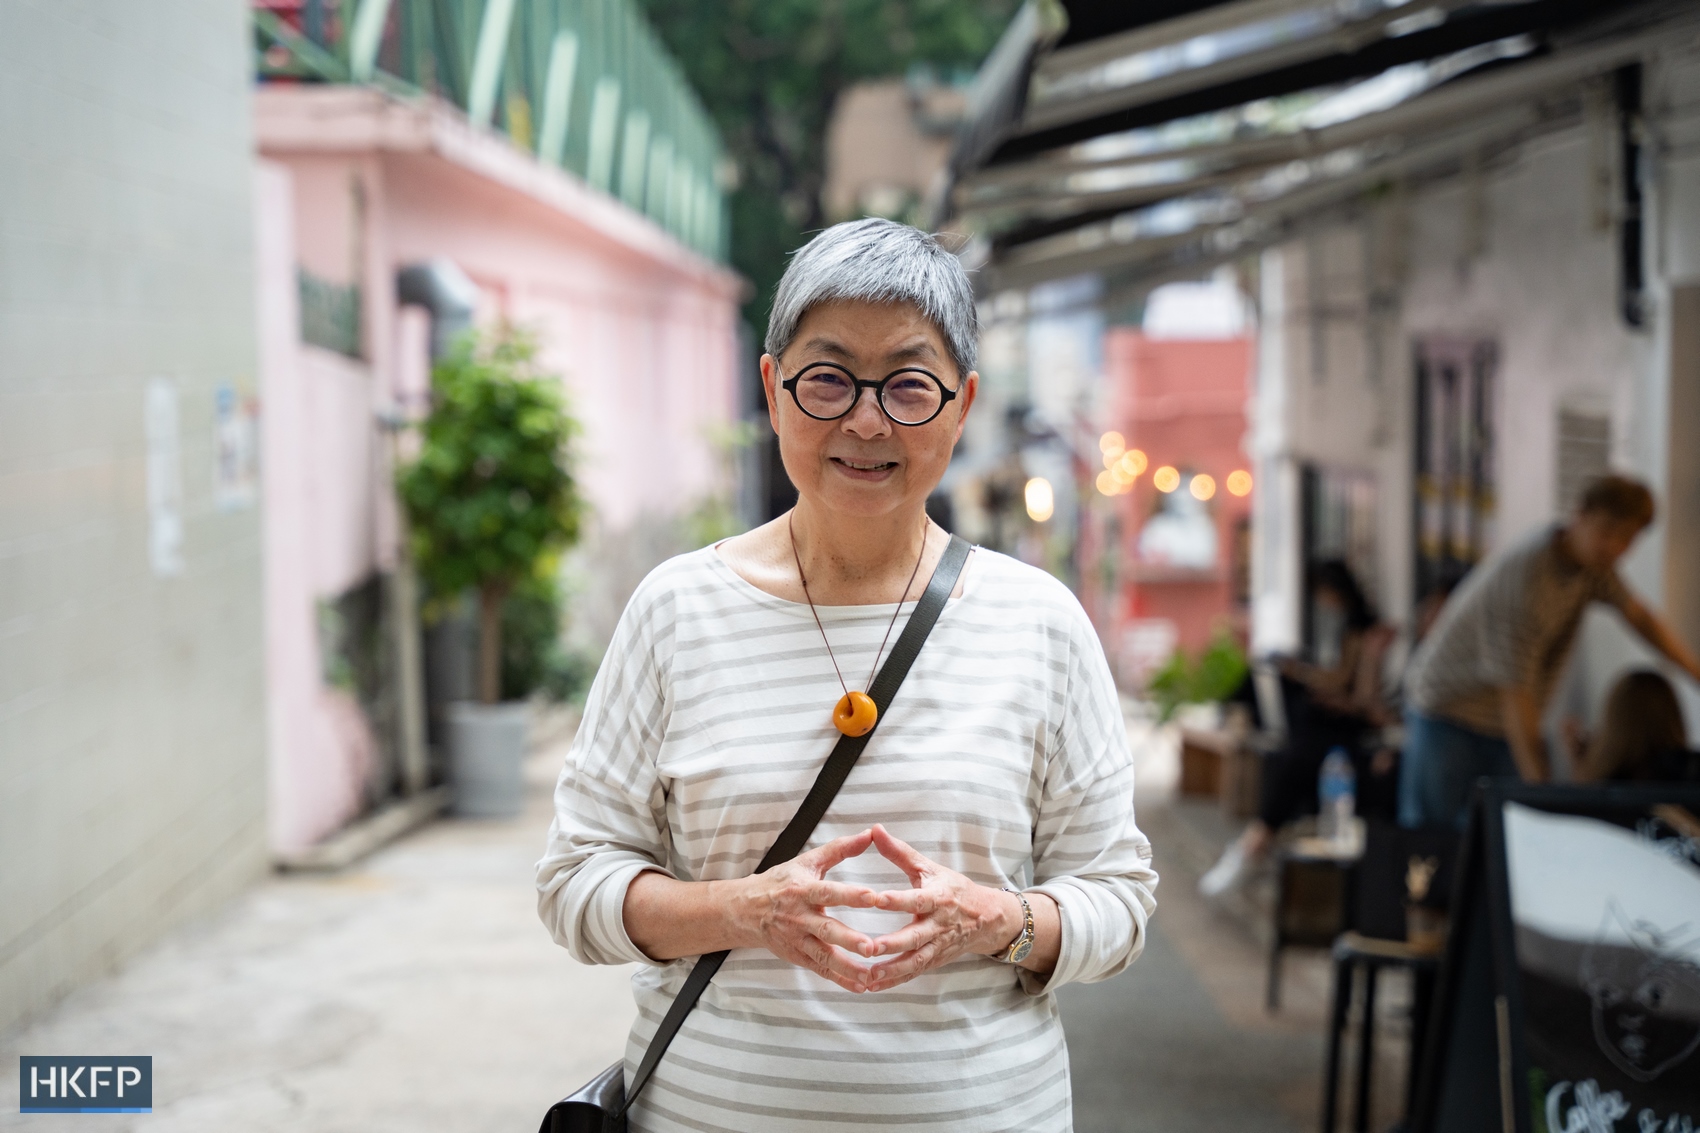 Margaret Ng, a writer and former lawmaker, told HKFP that independent bookstore Mount Zero had cultivated a spirit that facilitated the exchange of ideas in a free and equal manner. Photo: Kyle Lam/HKFP.